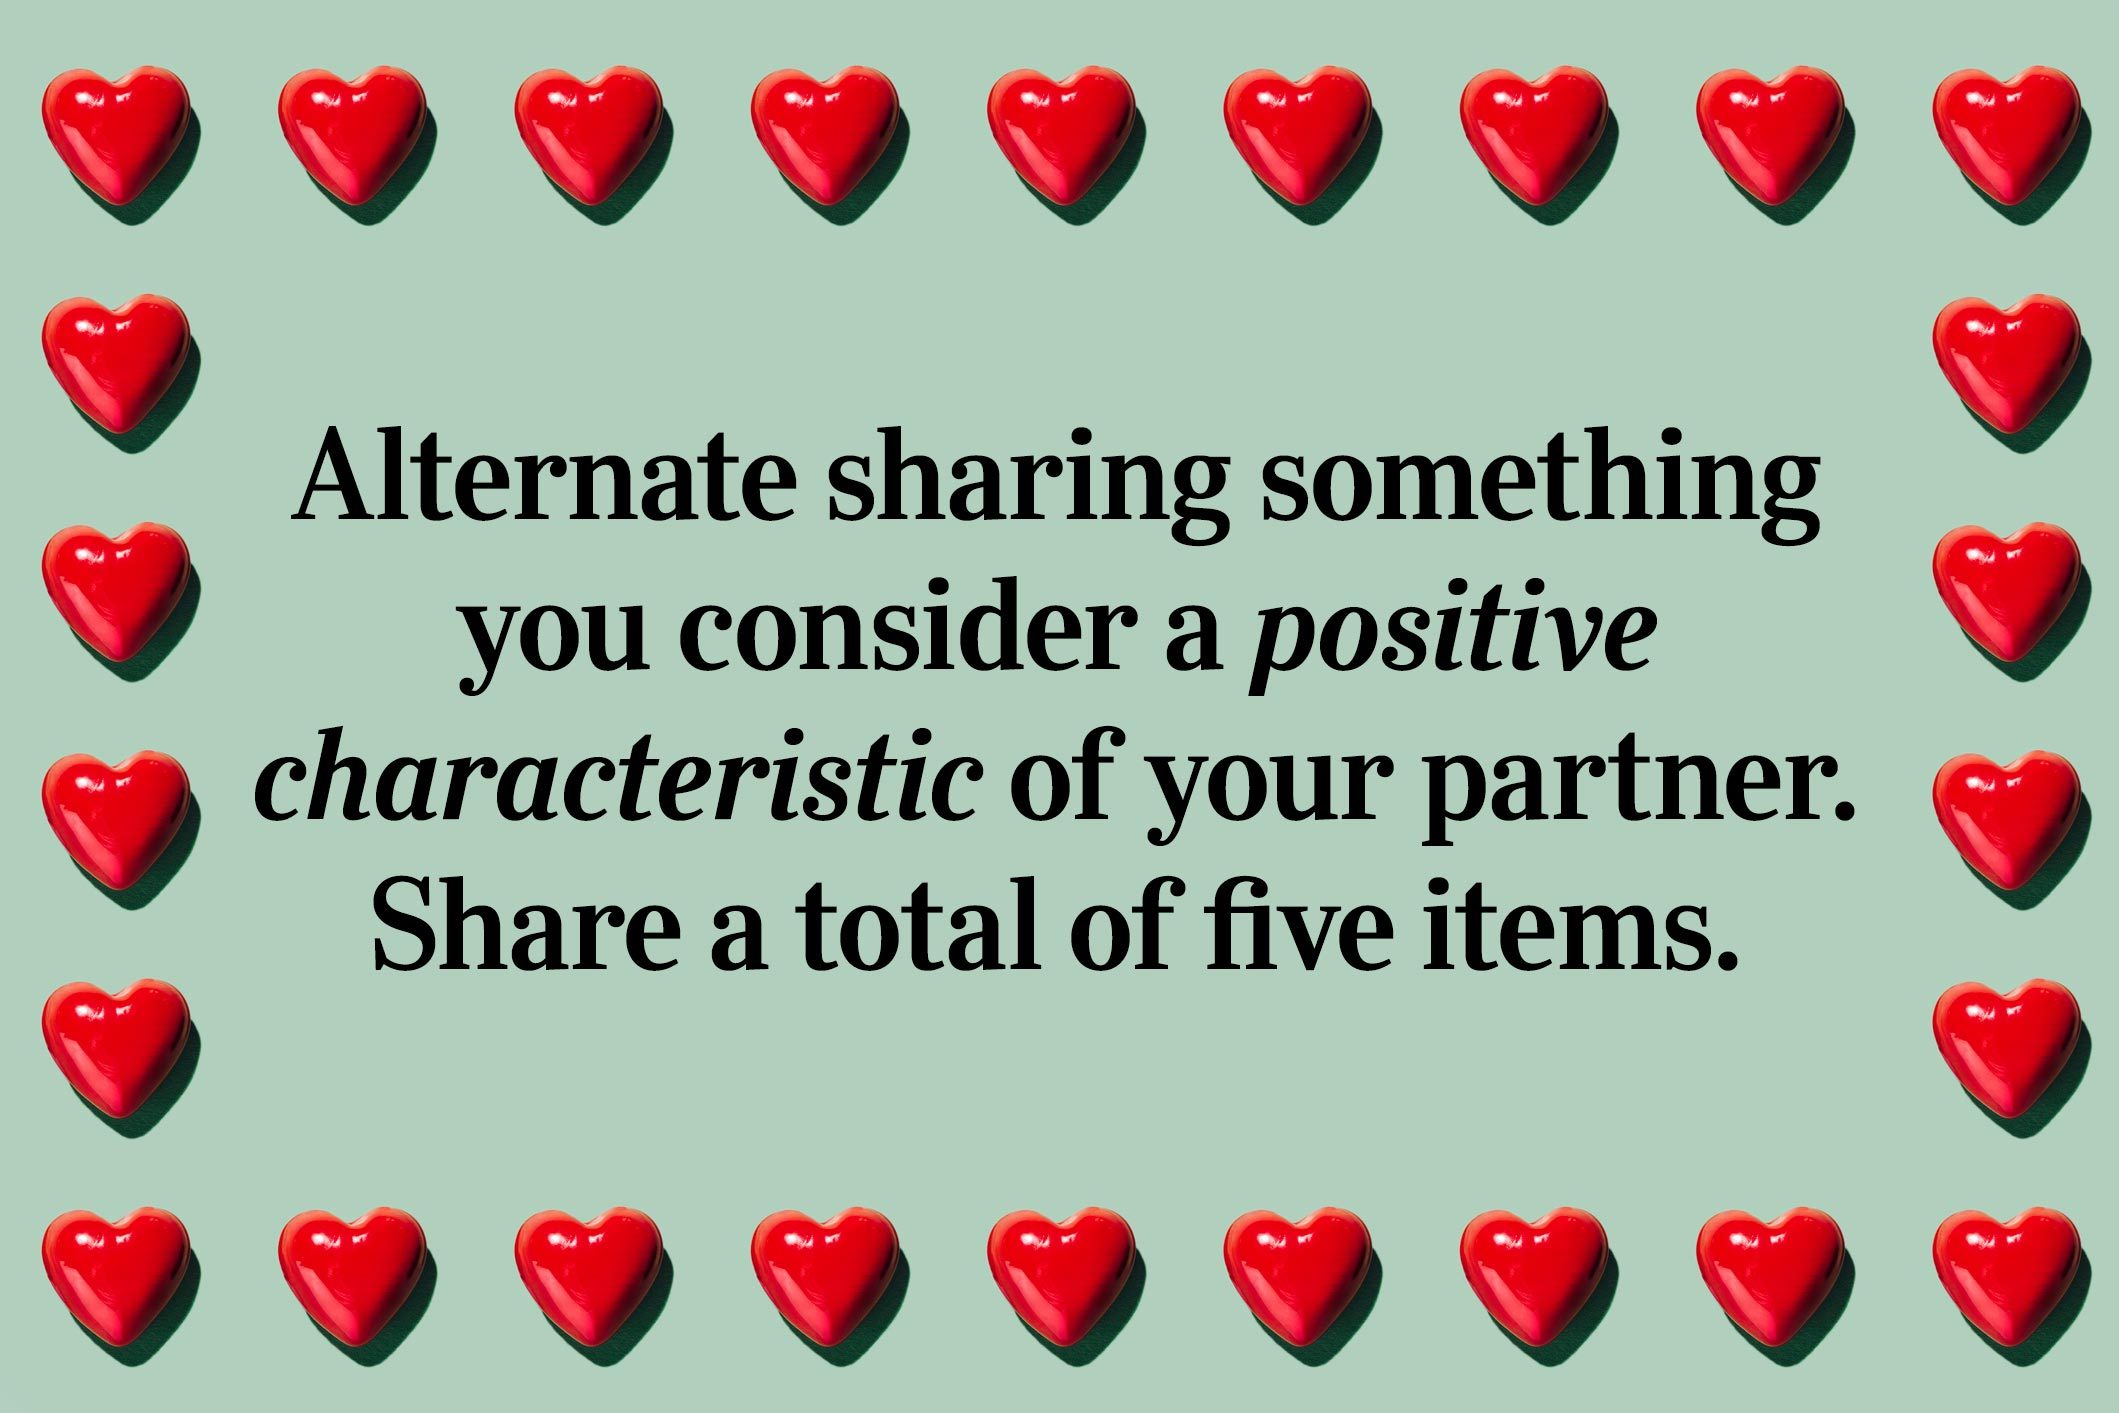 <p>Alternate sharing something you consider a positive characteristic of your partner. Share a total of five items.</p>